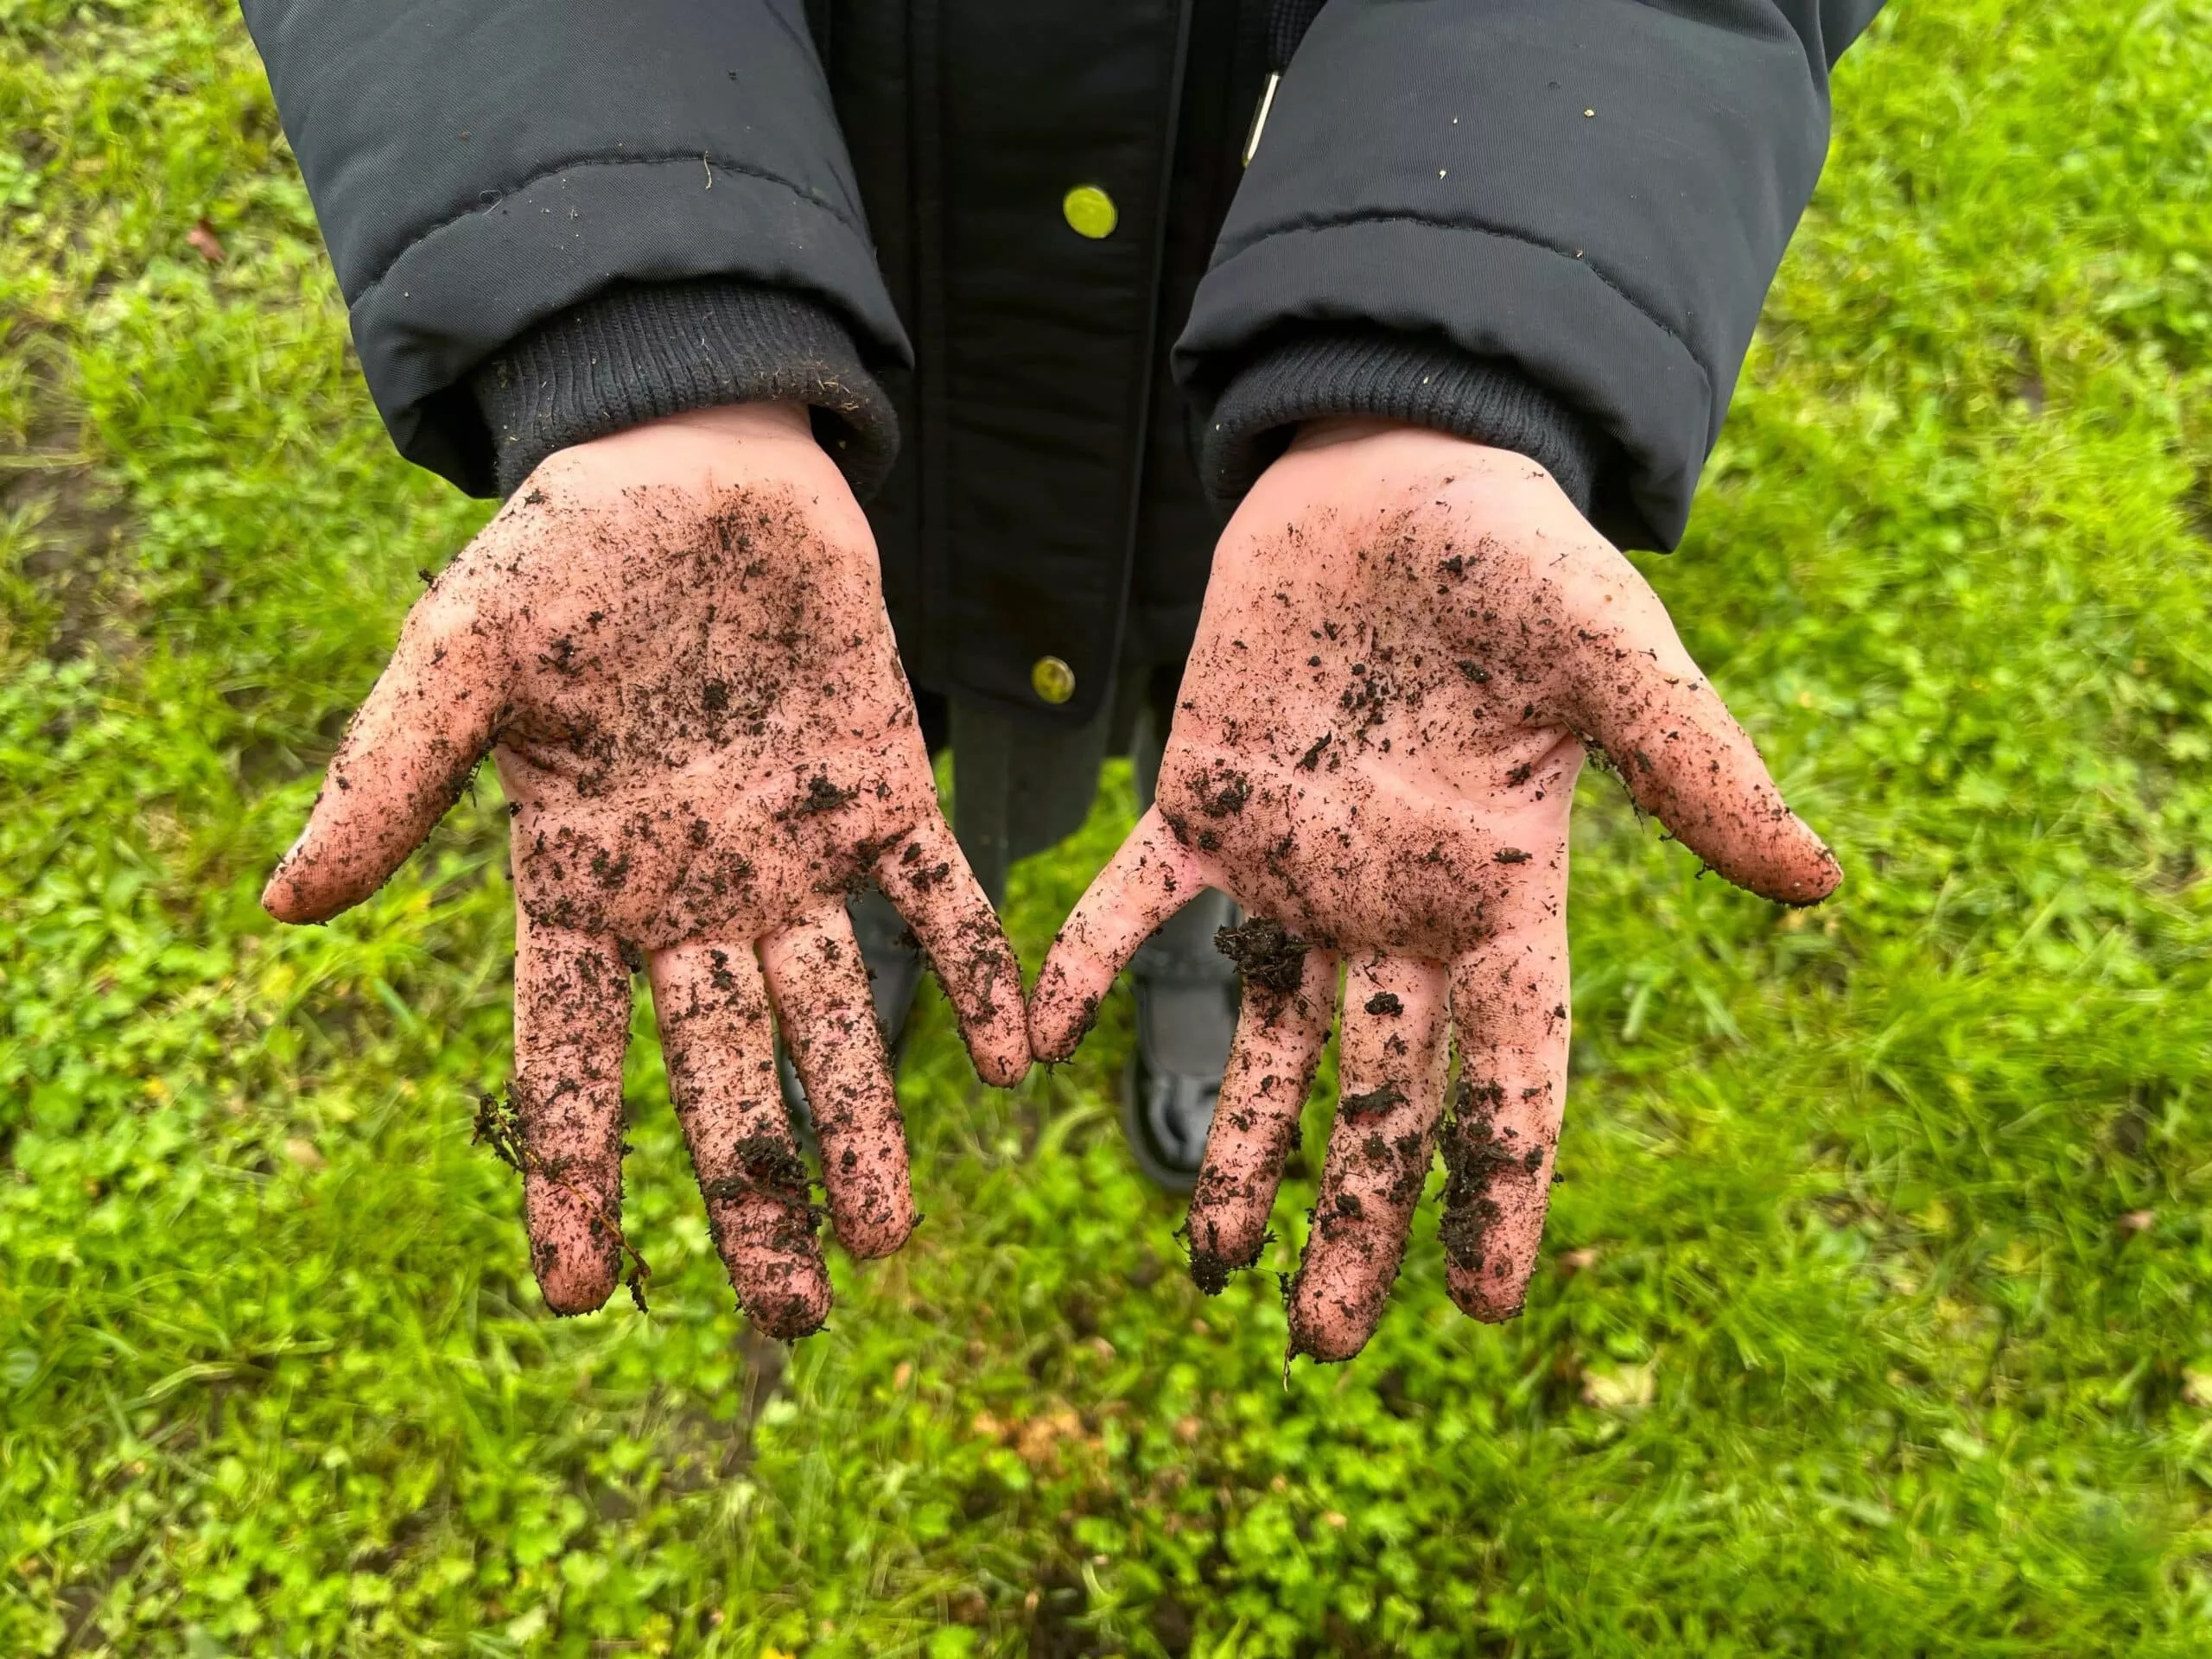 Photograph of a young child's hands covered in mud.